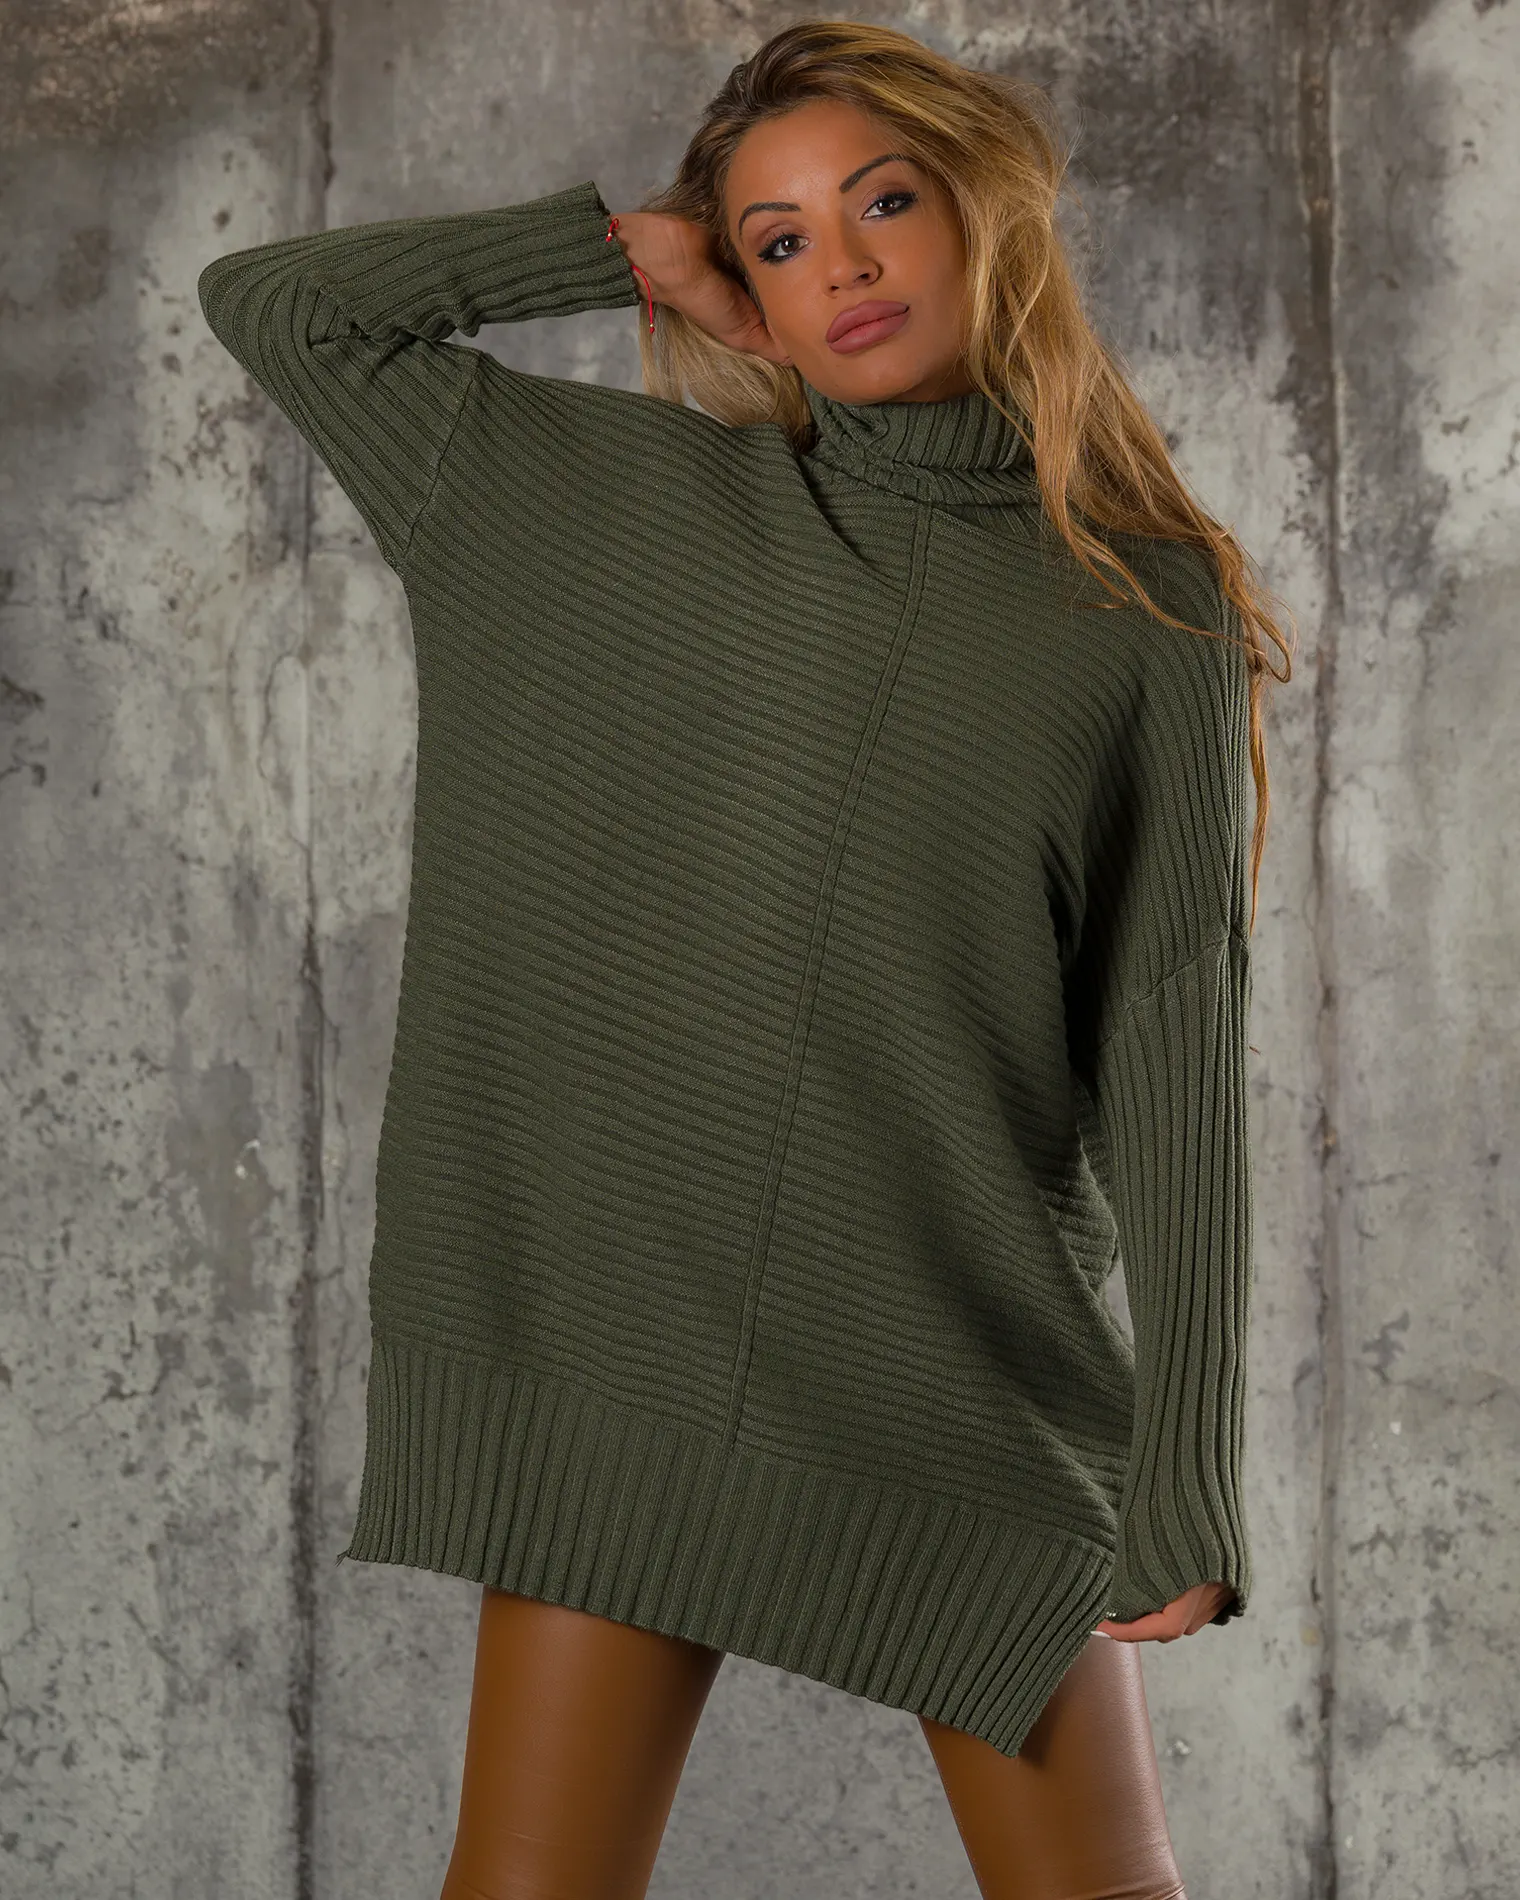 Everlee Long Sweater, Green Color